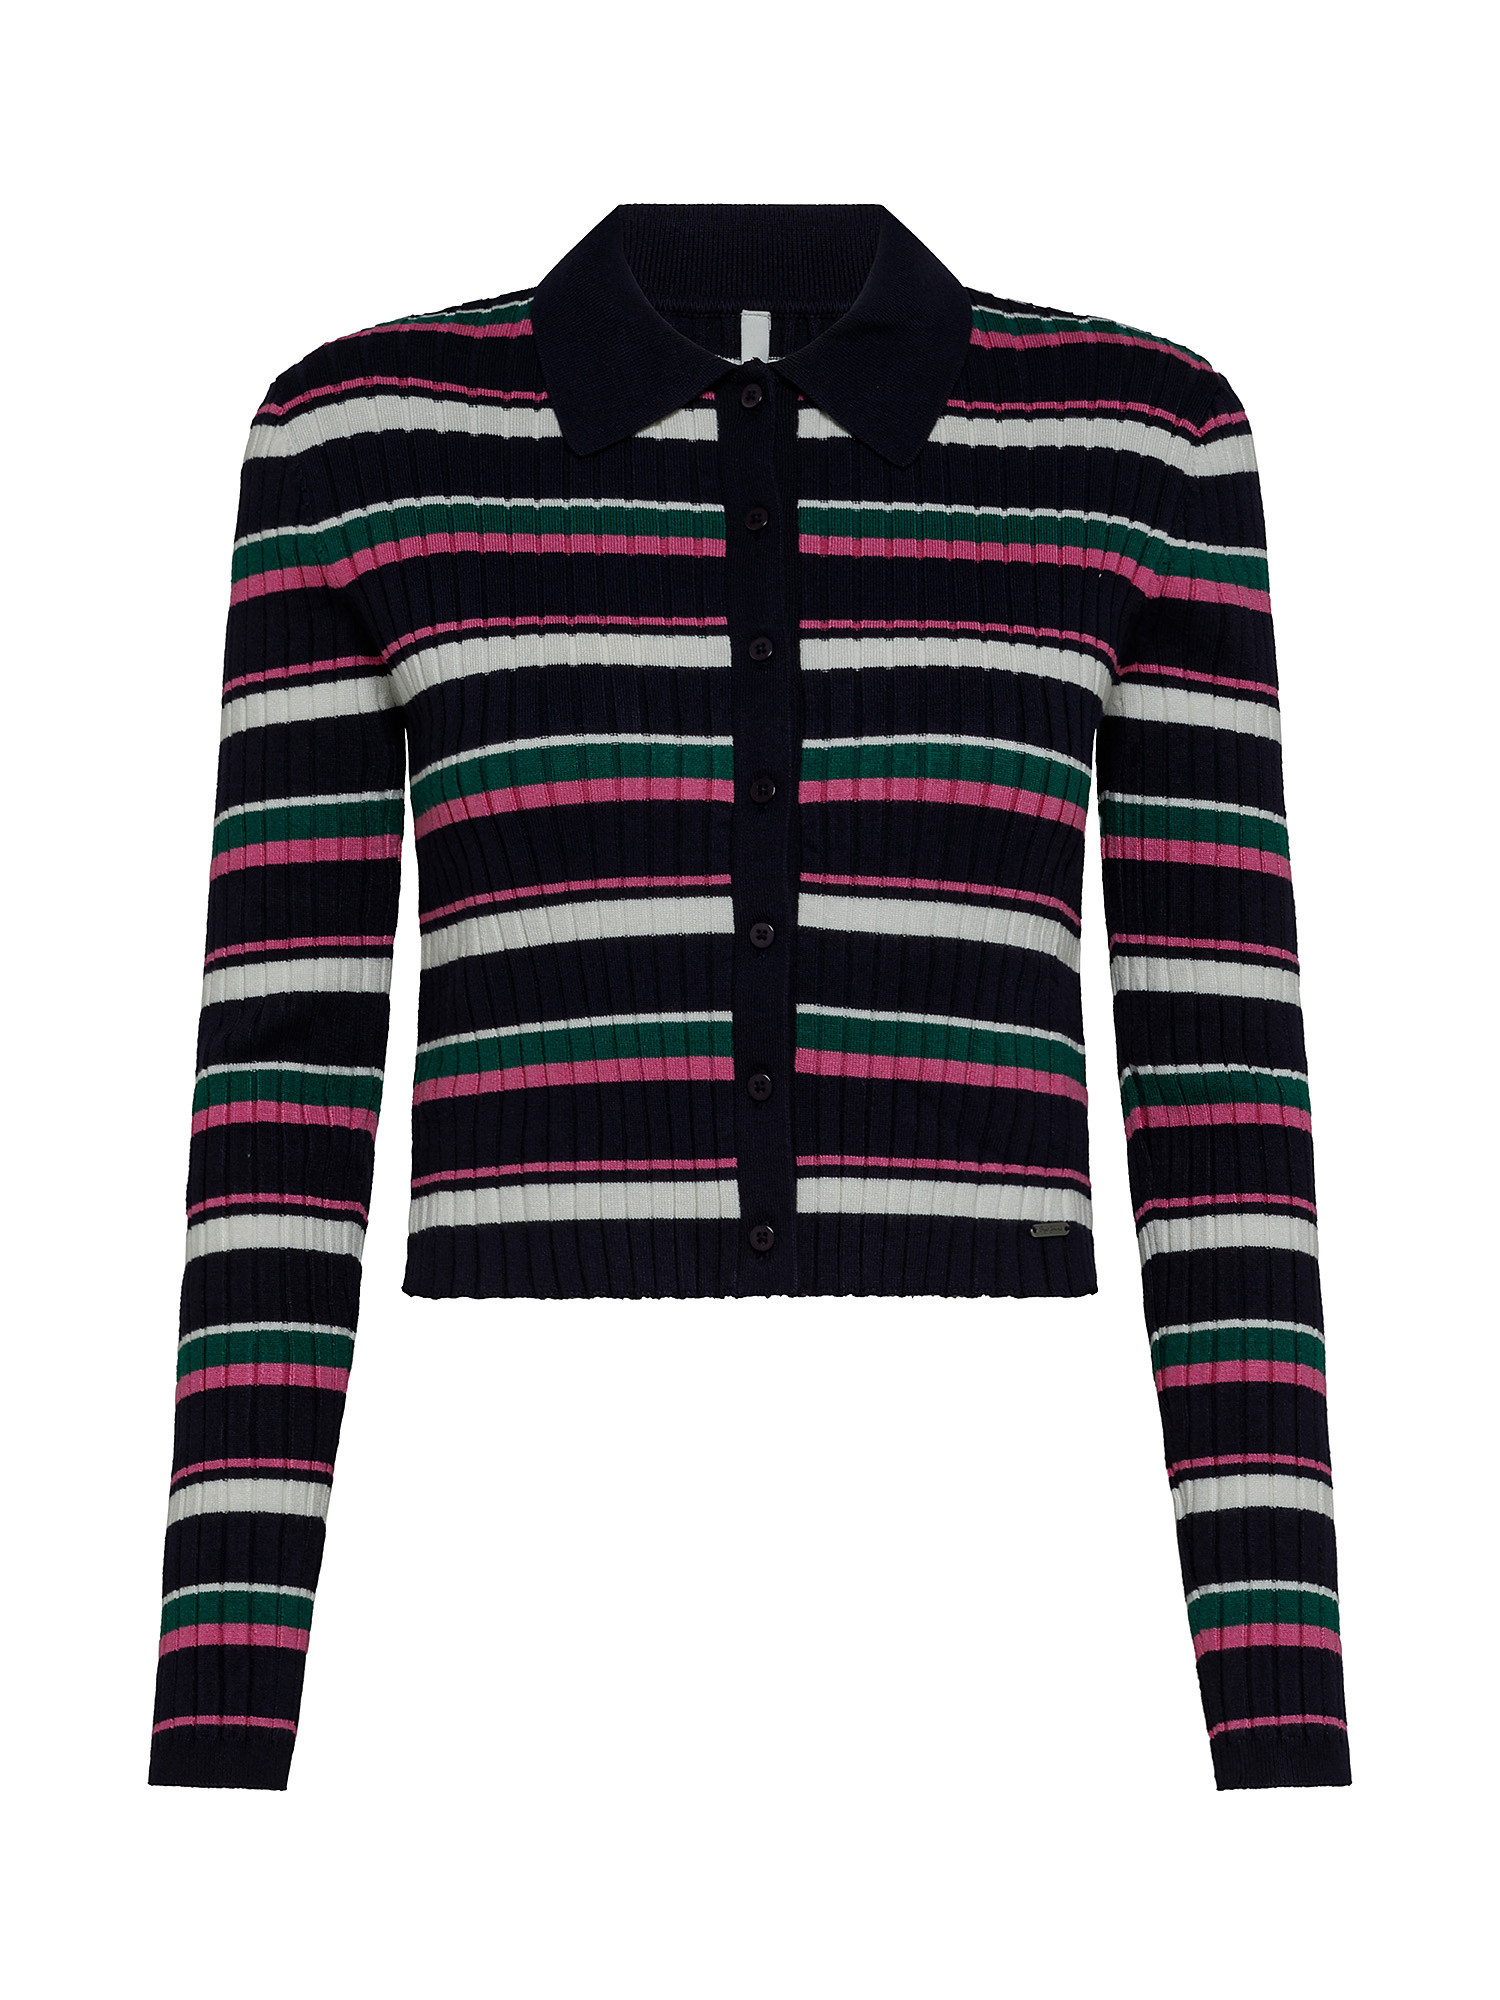 Barbora buttoned cardigan, Multicolor, large image number 0